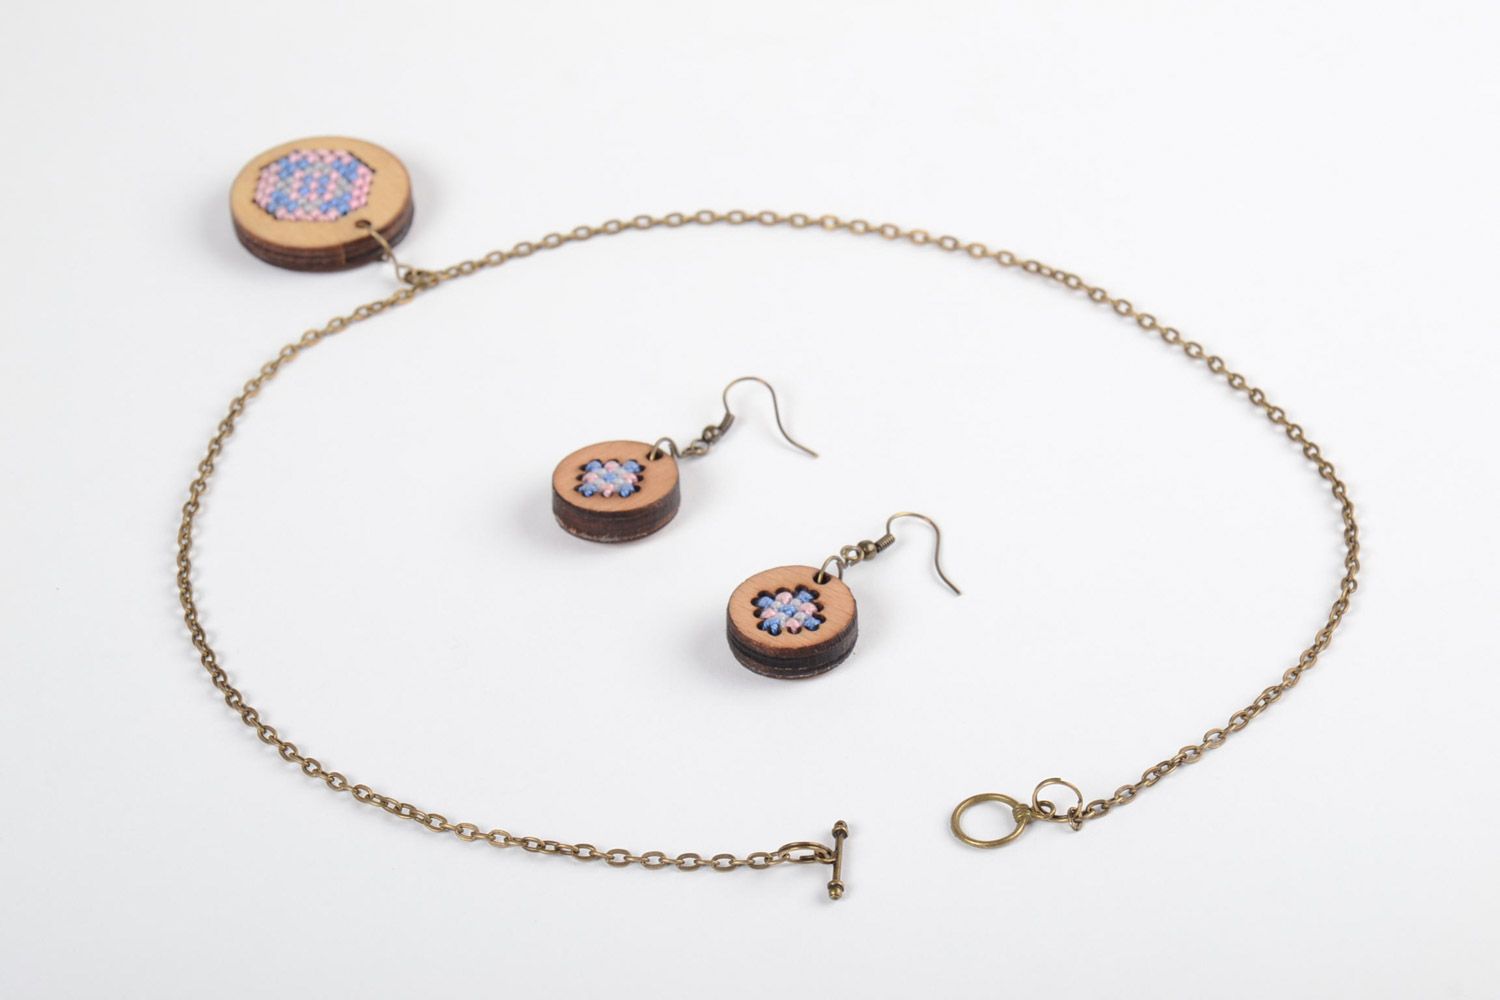 Handmade wooden jewelry set 2 pcs earrings and pendant with embroidery photo 4